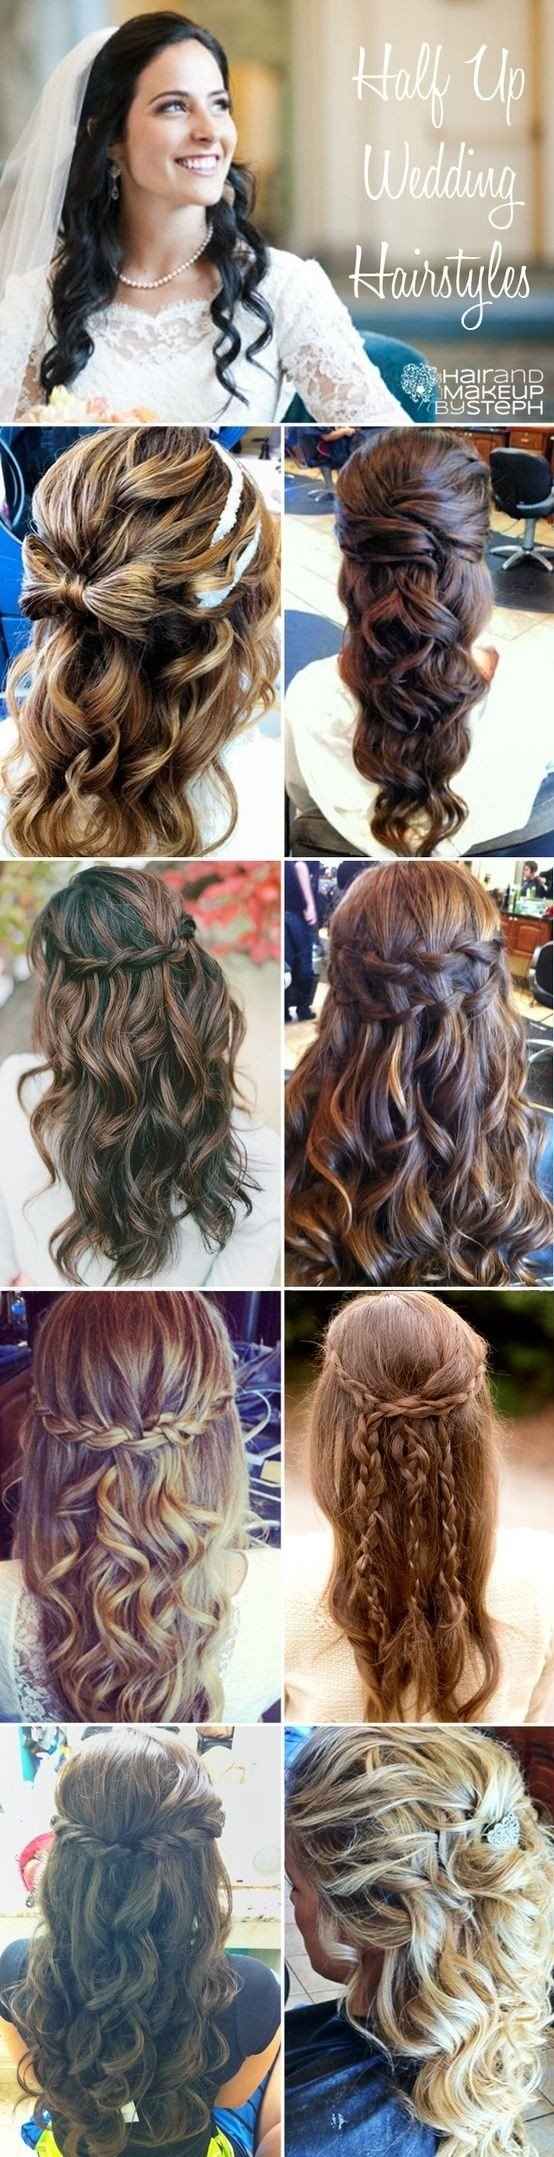 Show me your hair inspiration? and question